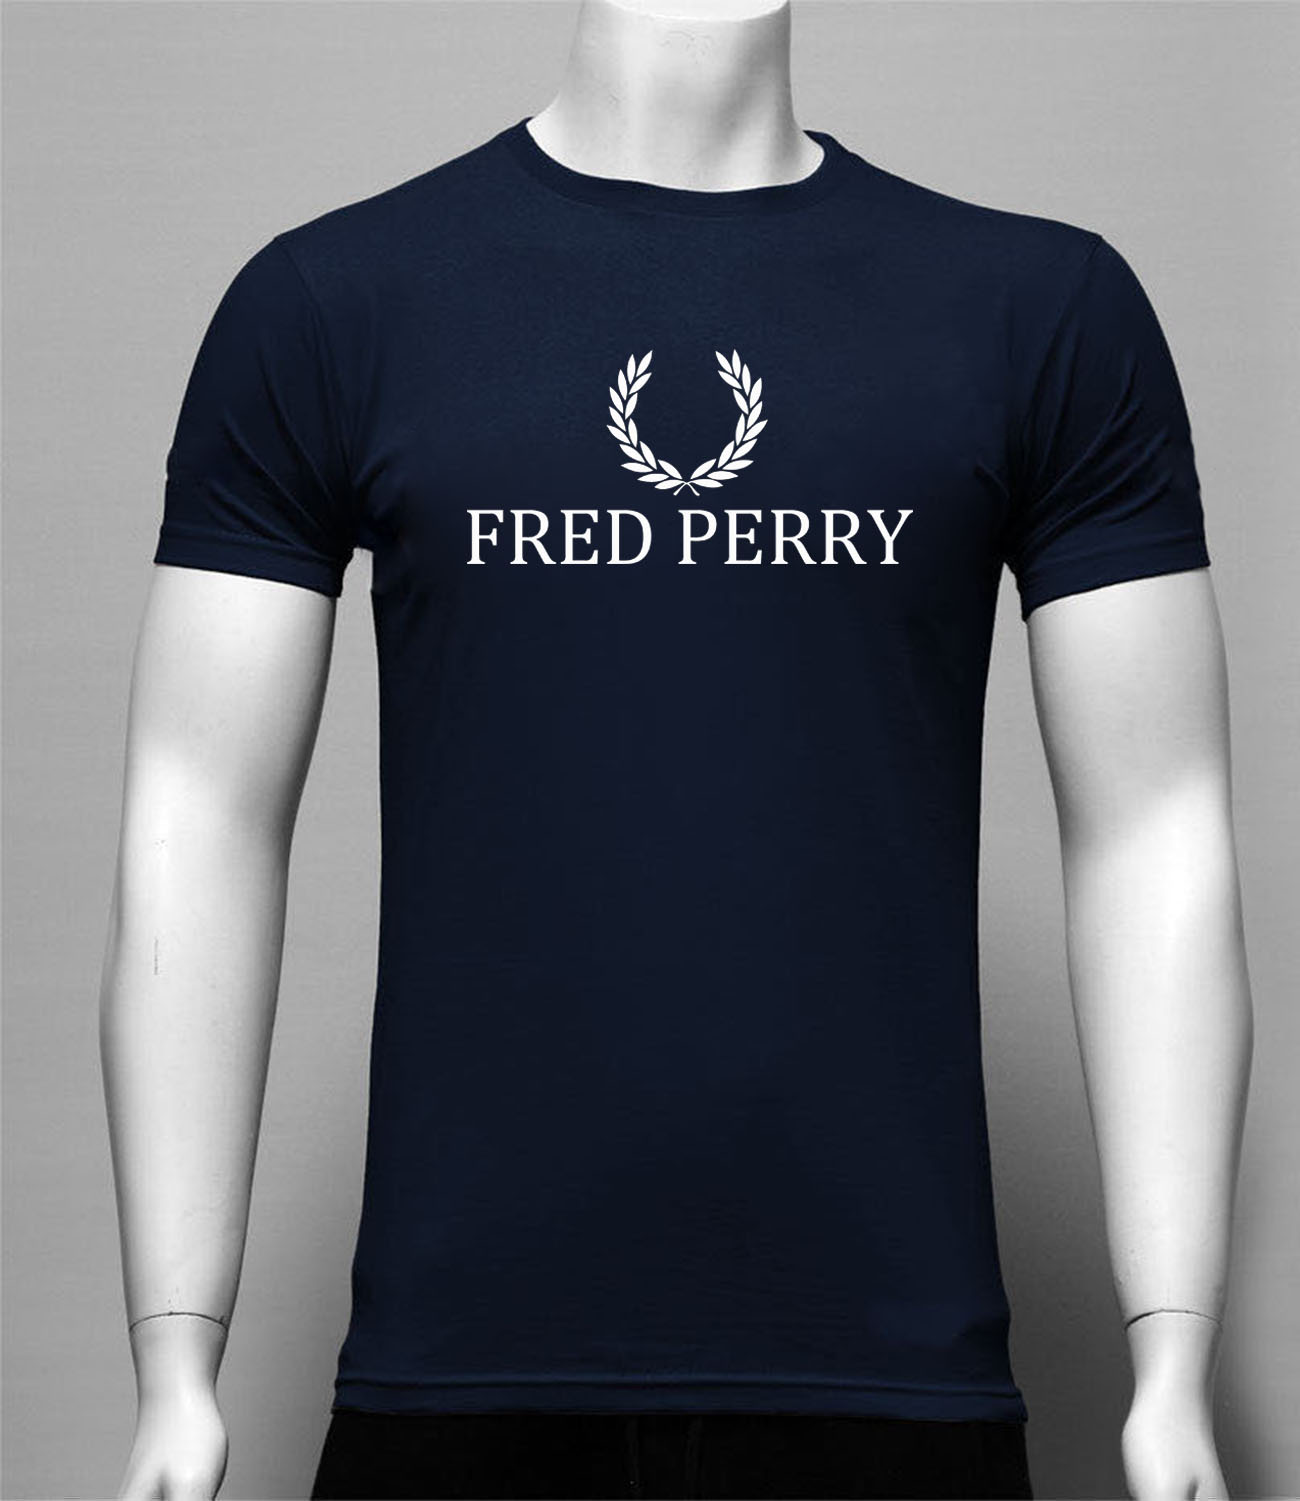 You are a pirate fred perry